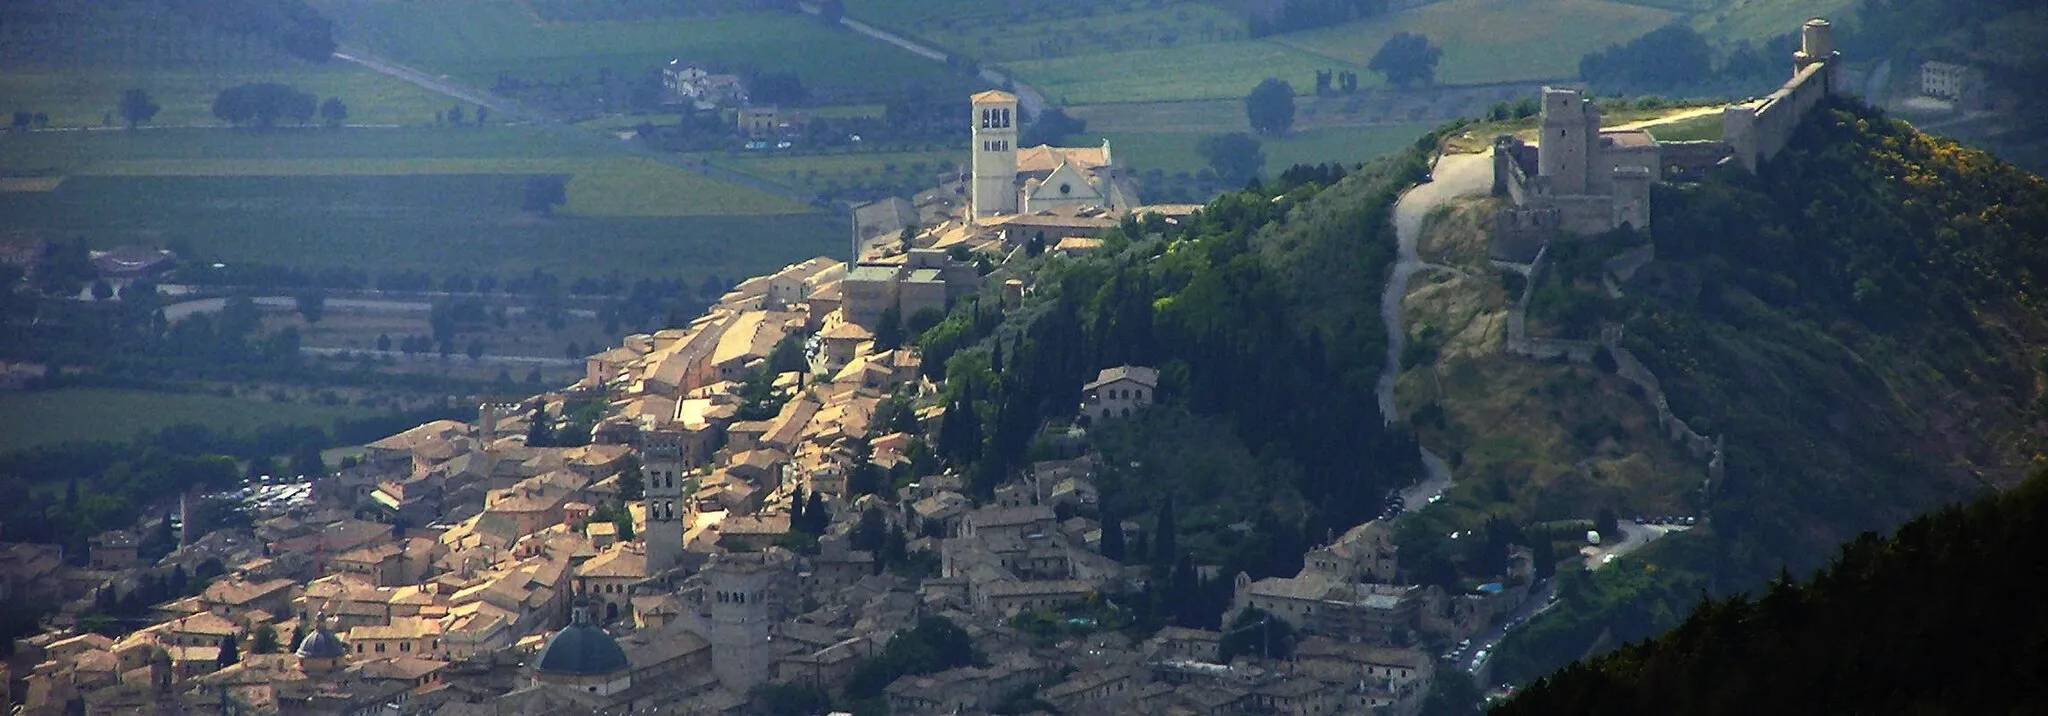 Photo showing: The pilgrim village Assisi in Italy, seen from Mt.Subasio